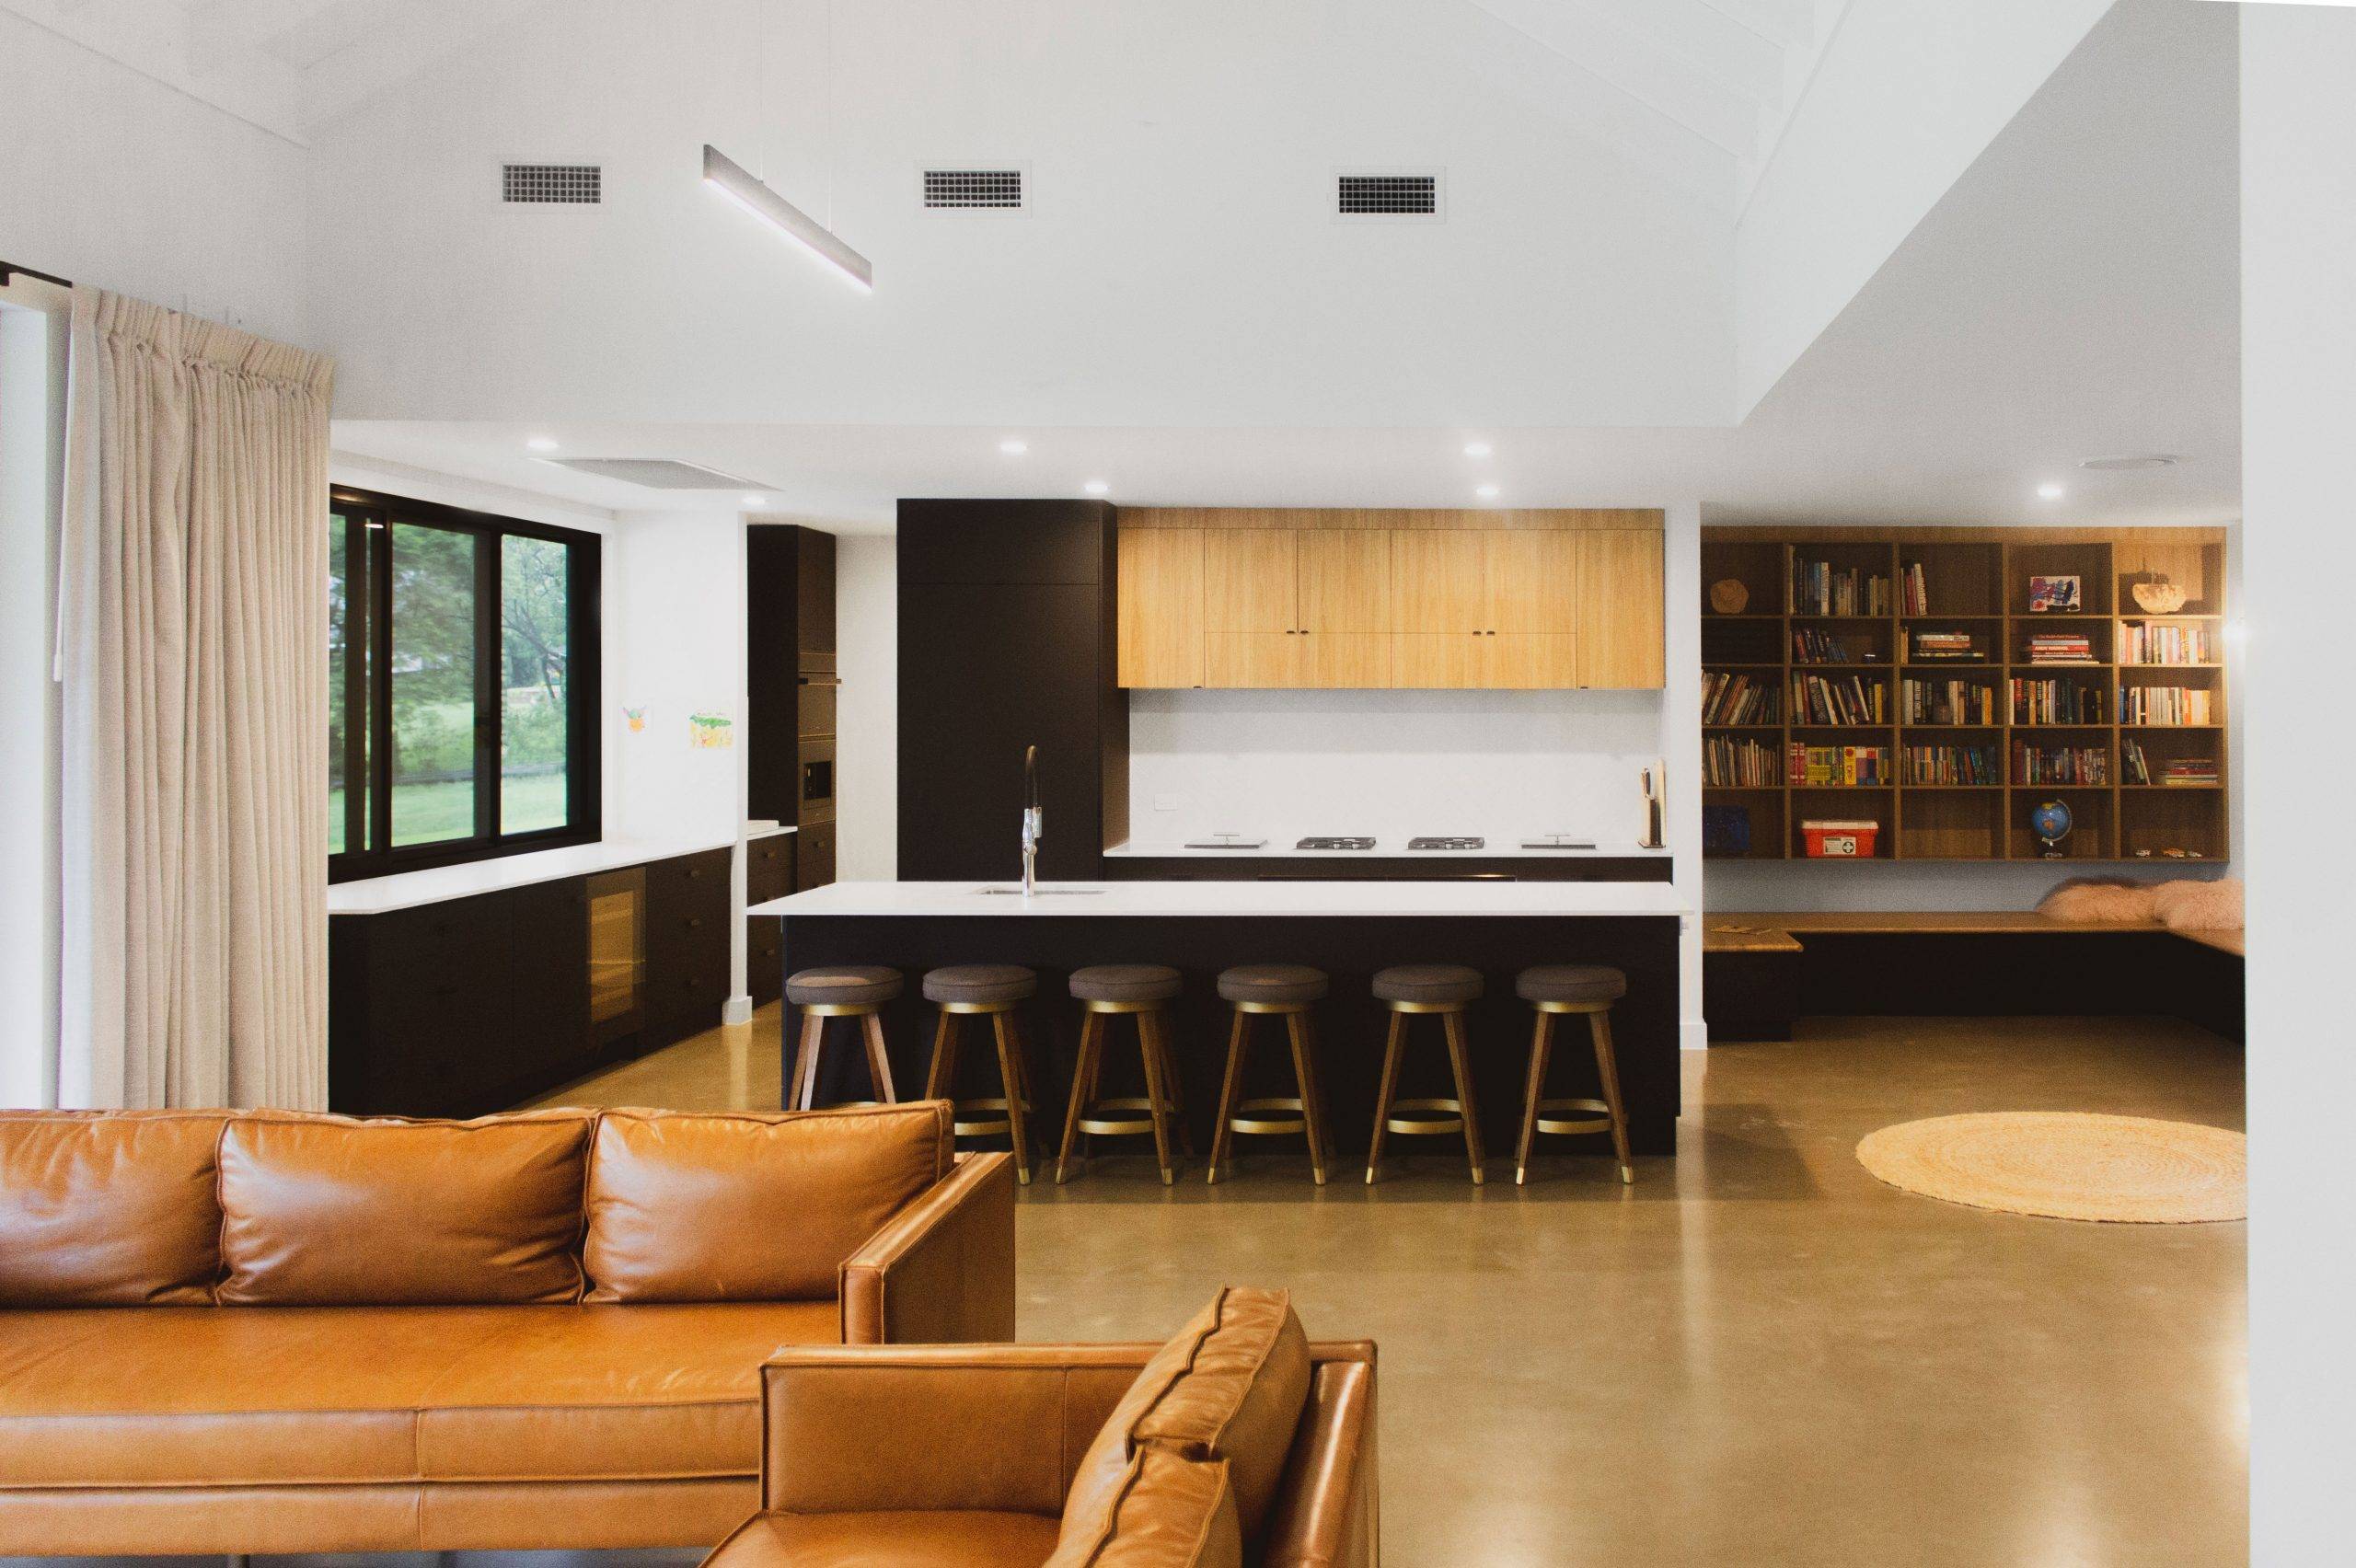 Cantwell St Architect designed contemporary farmhouse style home, High raked ceilings with exposed rafters, Large covered outdoor spaces, Minimalist material palette of polished concrete, stained timber, exposed brick and white paint.